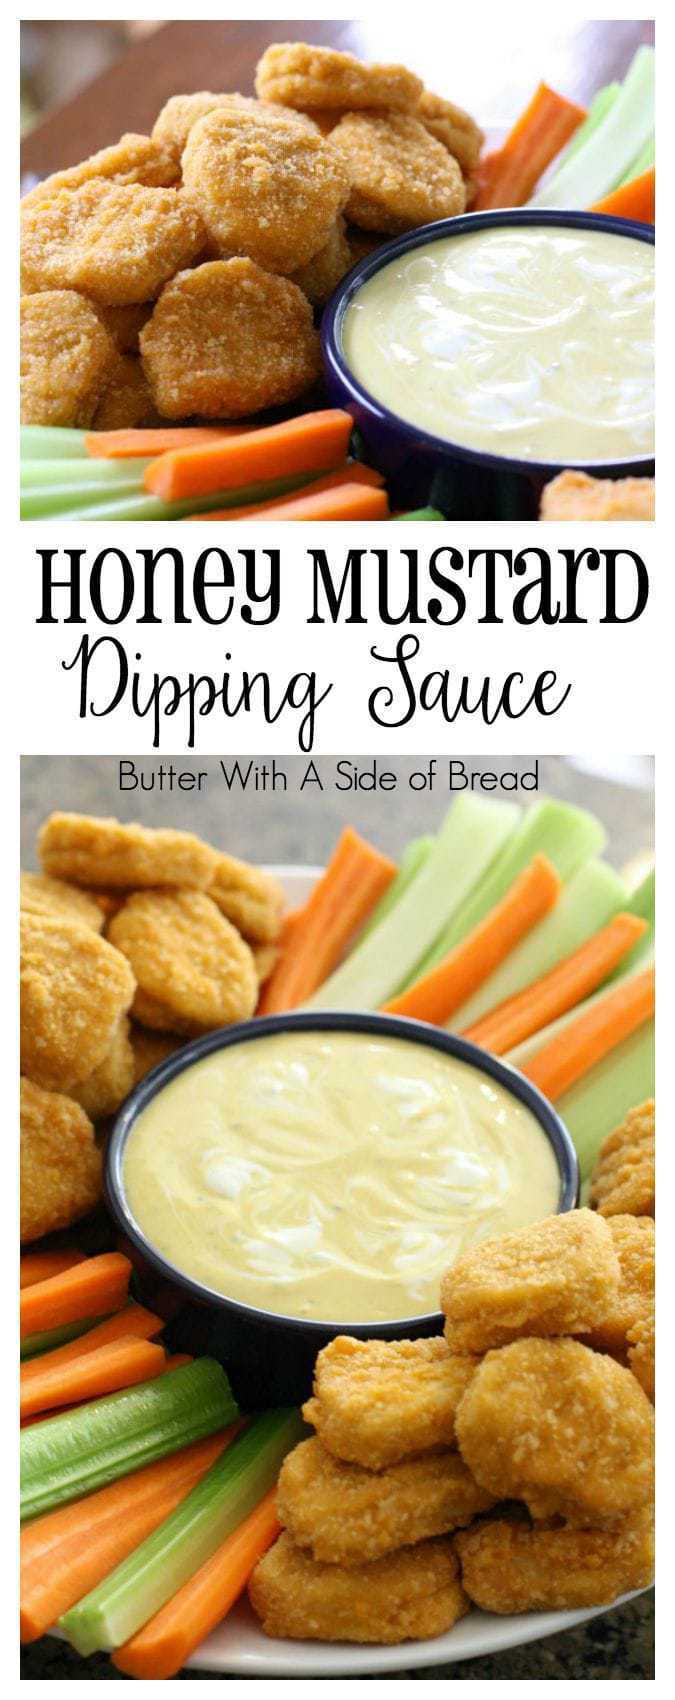 Honey Mustard Dipping Sauce - Butter With A Side of Bread